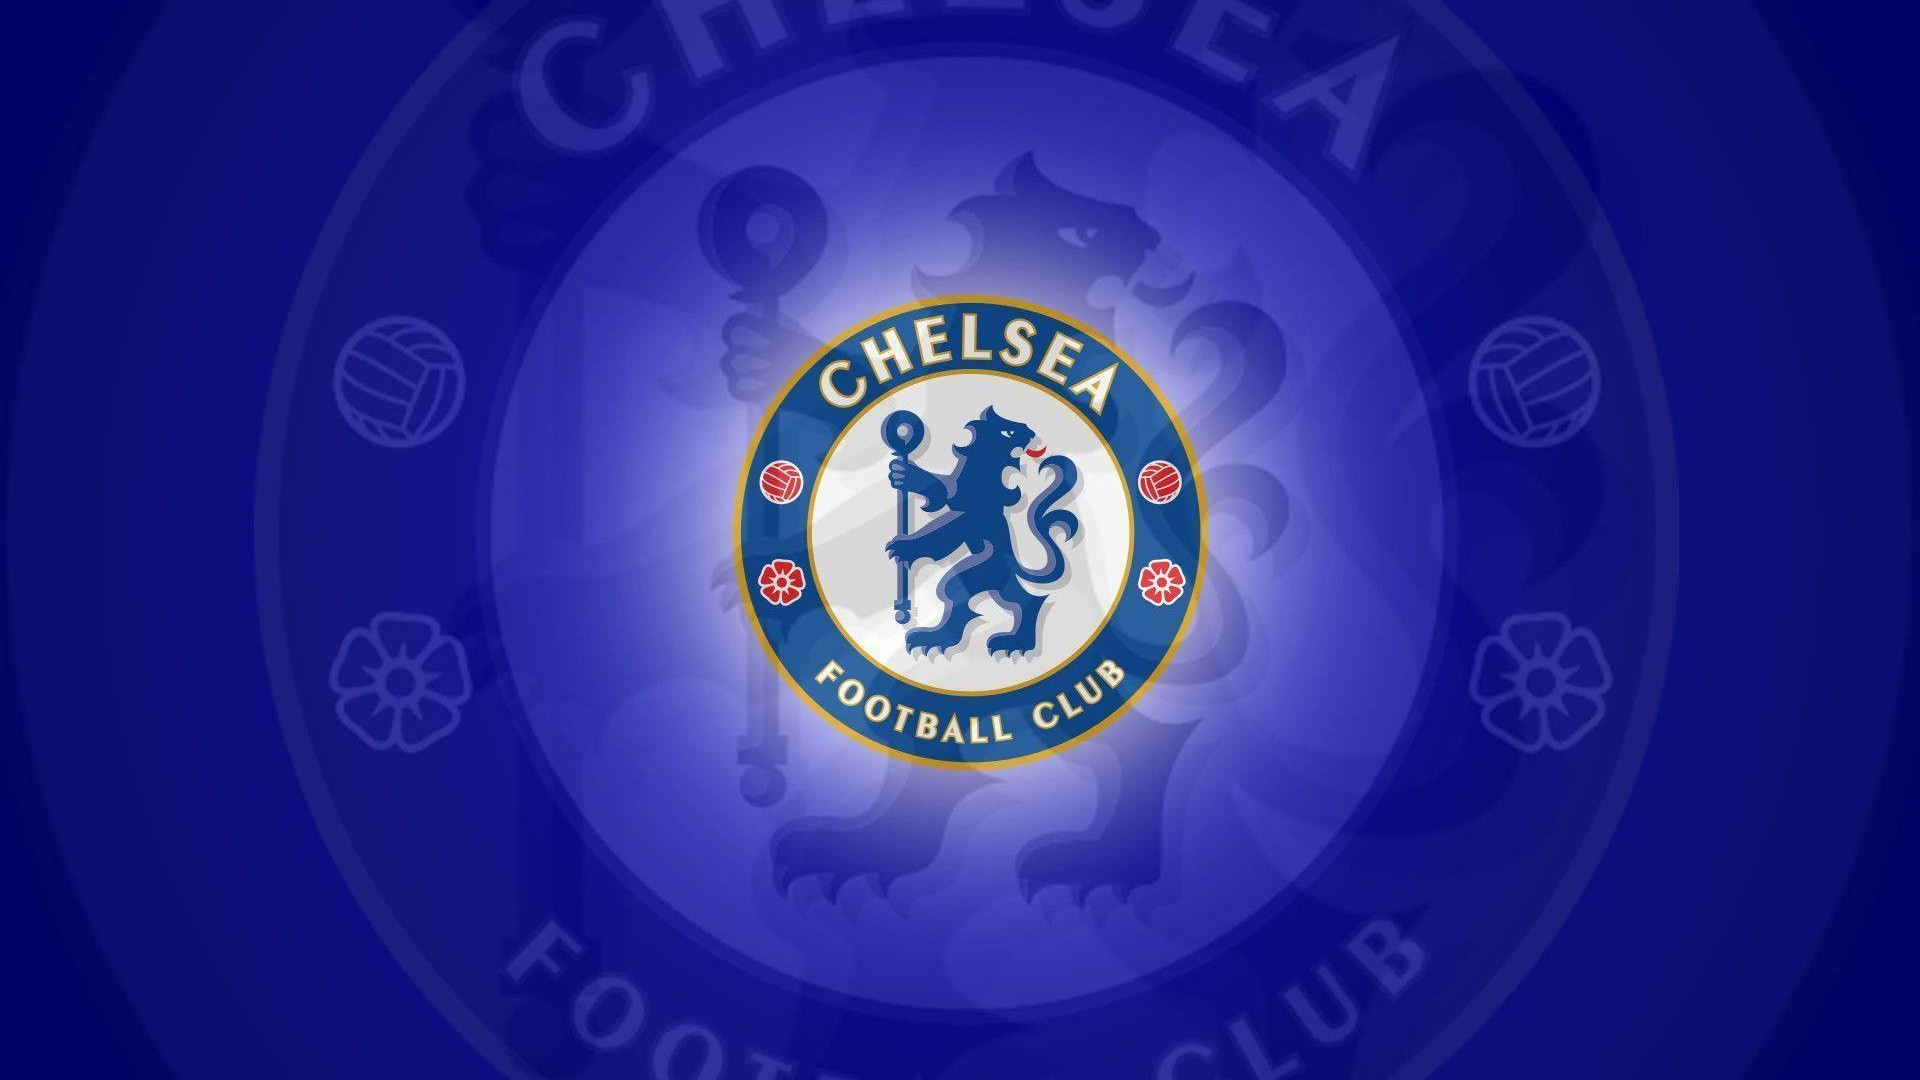 Chelsea Logo Wallpaper For Mac Backgrounds with high-resolution 1920x1080 pixel. You can use this wallpaper for your Desktop Computers, Mac Screensavers, Windows Backgrounds, iPhone Wallpapers, Tablet or Android Lock screen and another Mobile device